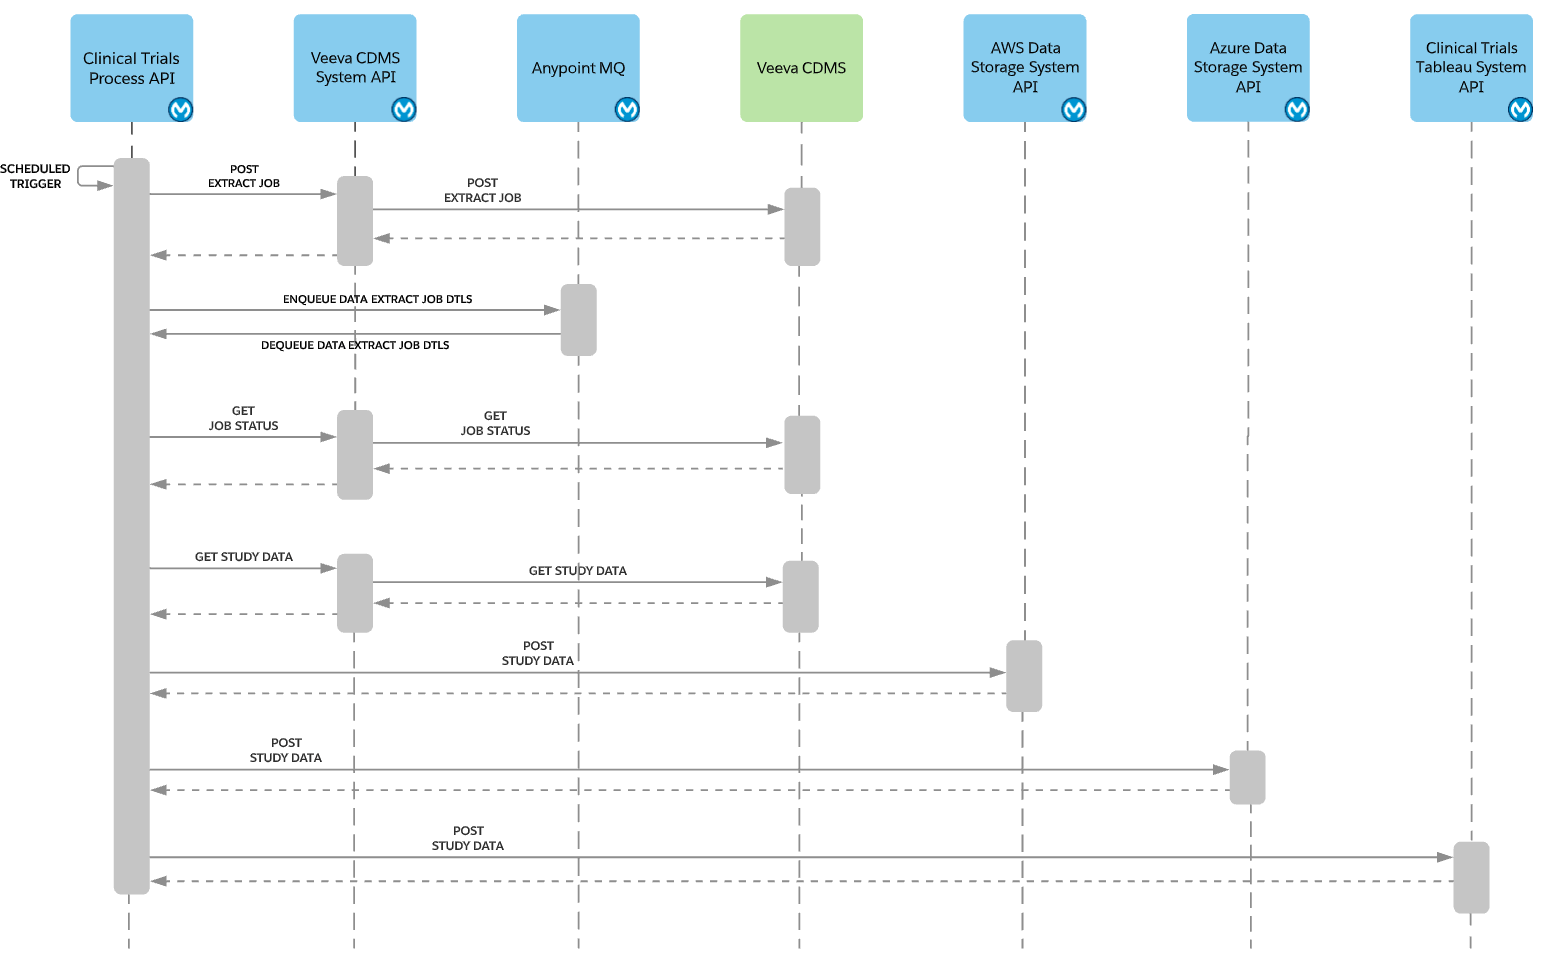 Sequence diagram for clinical trial analytics with CDMS study data